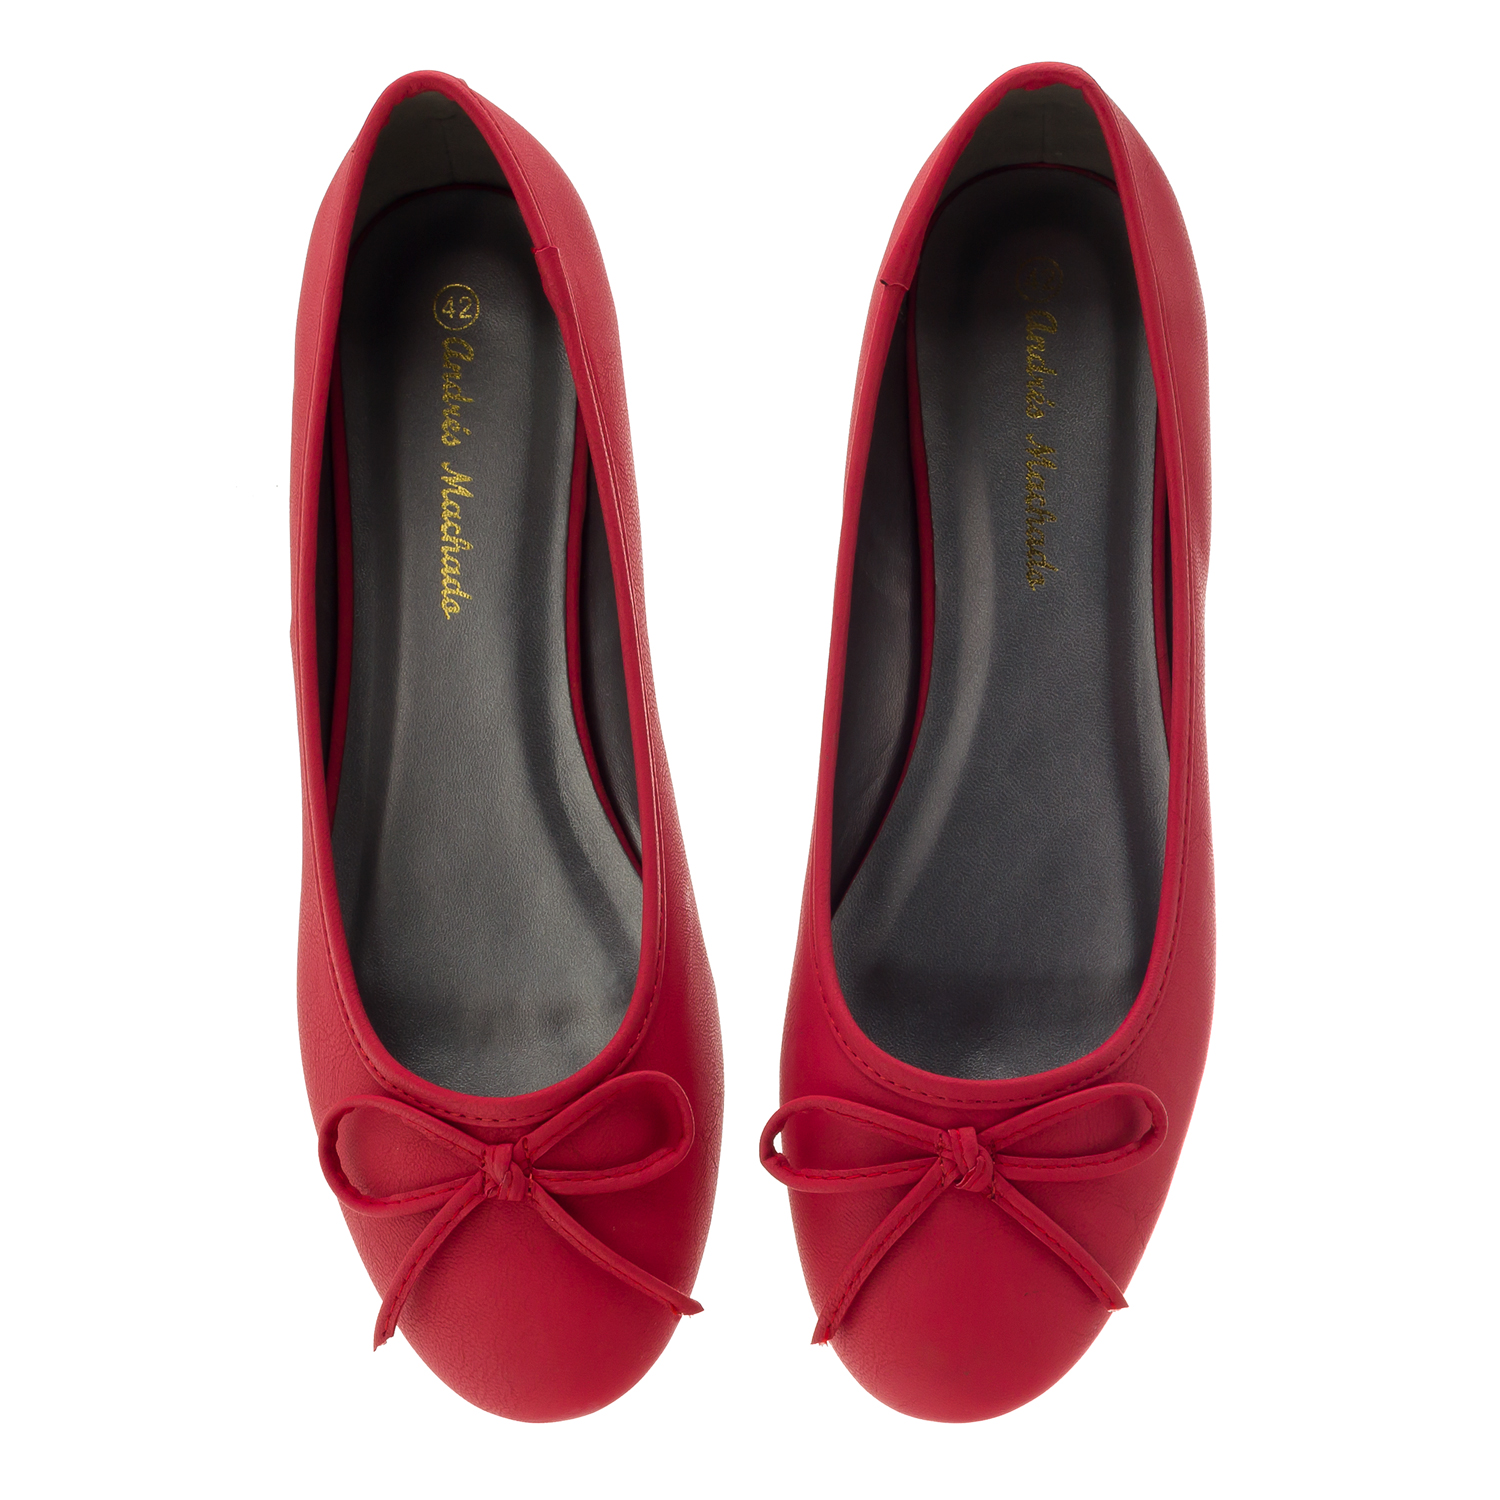 Red faux-pull-leather Ballerinas with bow. 